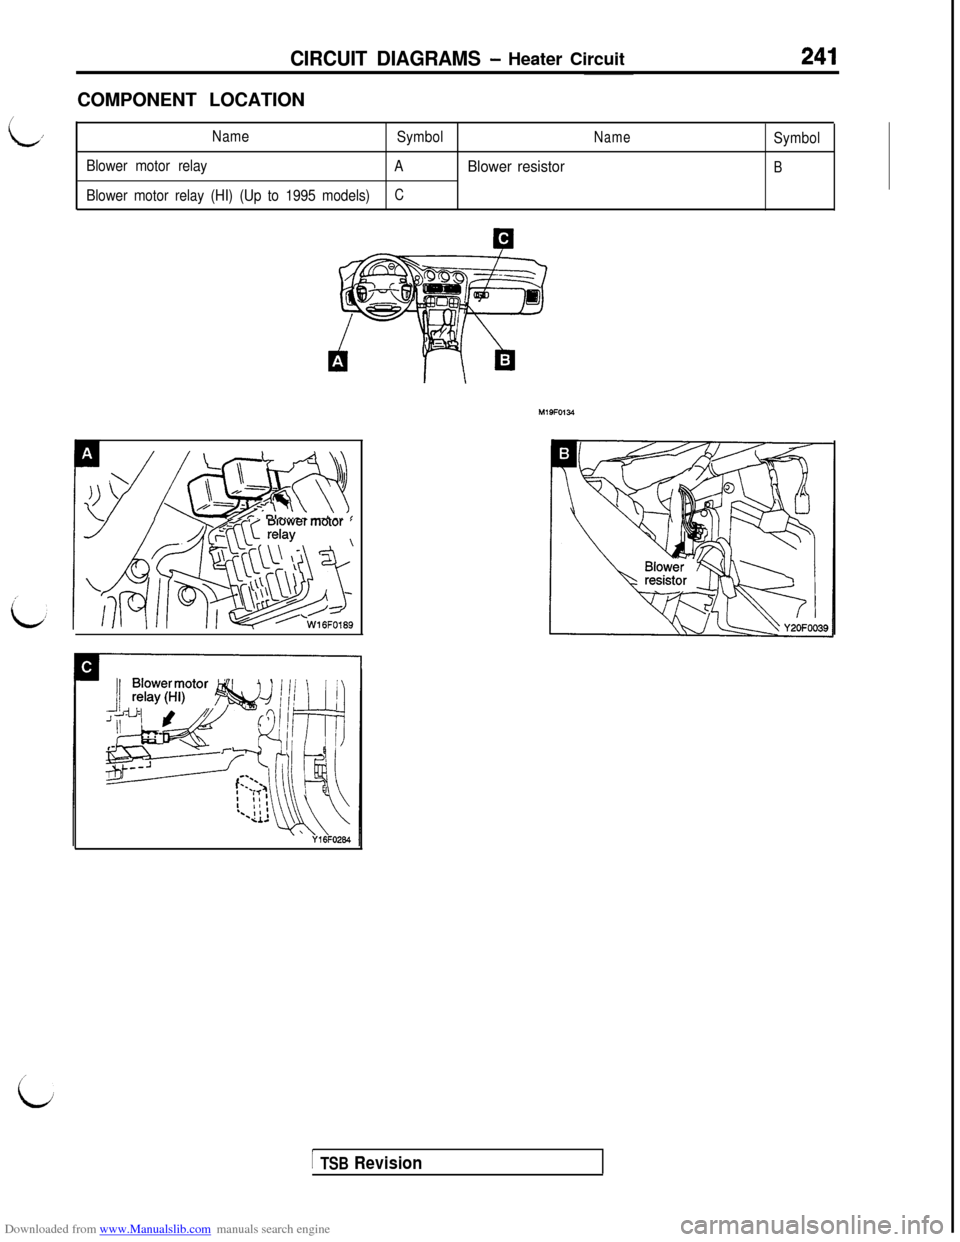 MITSUBISHI 3000GT 1992 2.G Workshop Manual Downloaded from www.Manualslib.com manuals search engine CIRCUIT DIAGRAMS - Heater CircuitCOMPONENT LOCATION
,Name
SymbolNameSymbol
Blower motor relay
A
Blower resistorB
Blower motor relay (HI) (Up to